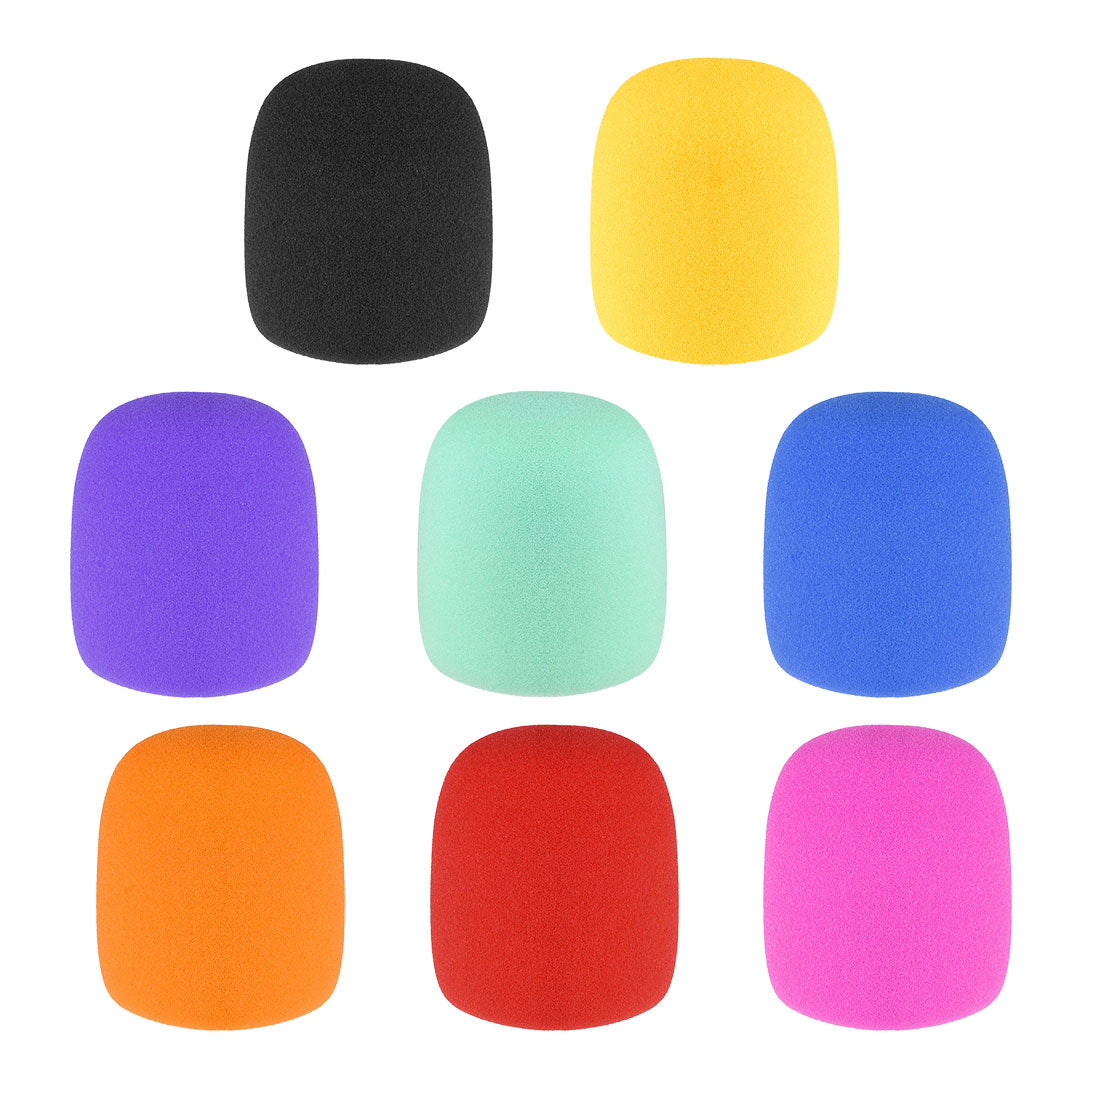 uxcell Uxcell 8Pack Thicken Sponge Foam Mic Cover Handheld Microphone Windscreen Pack for KTV